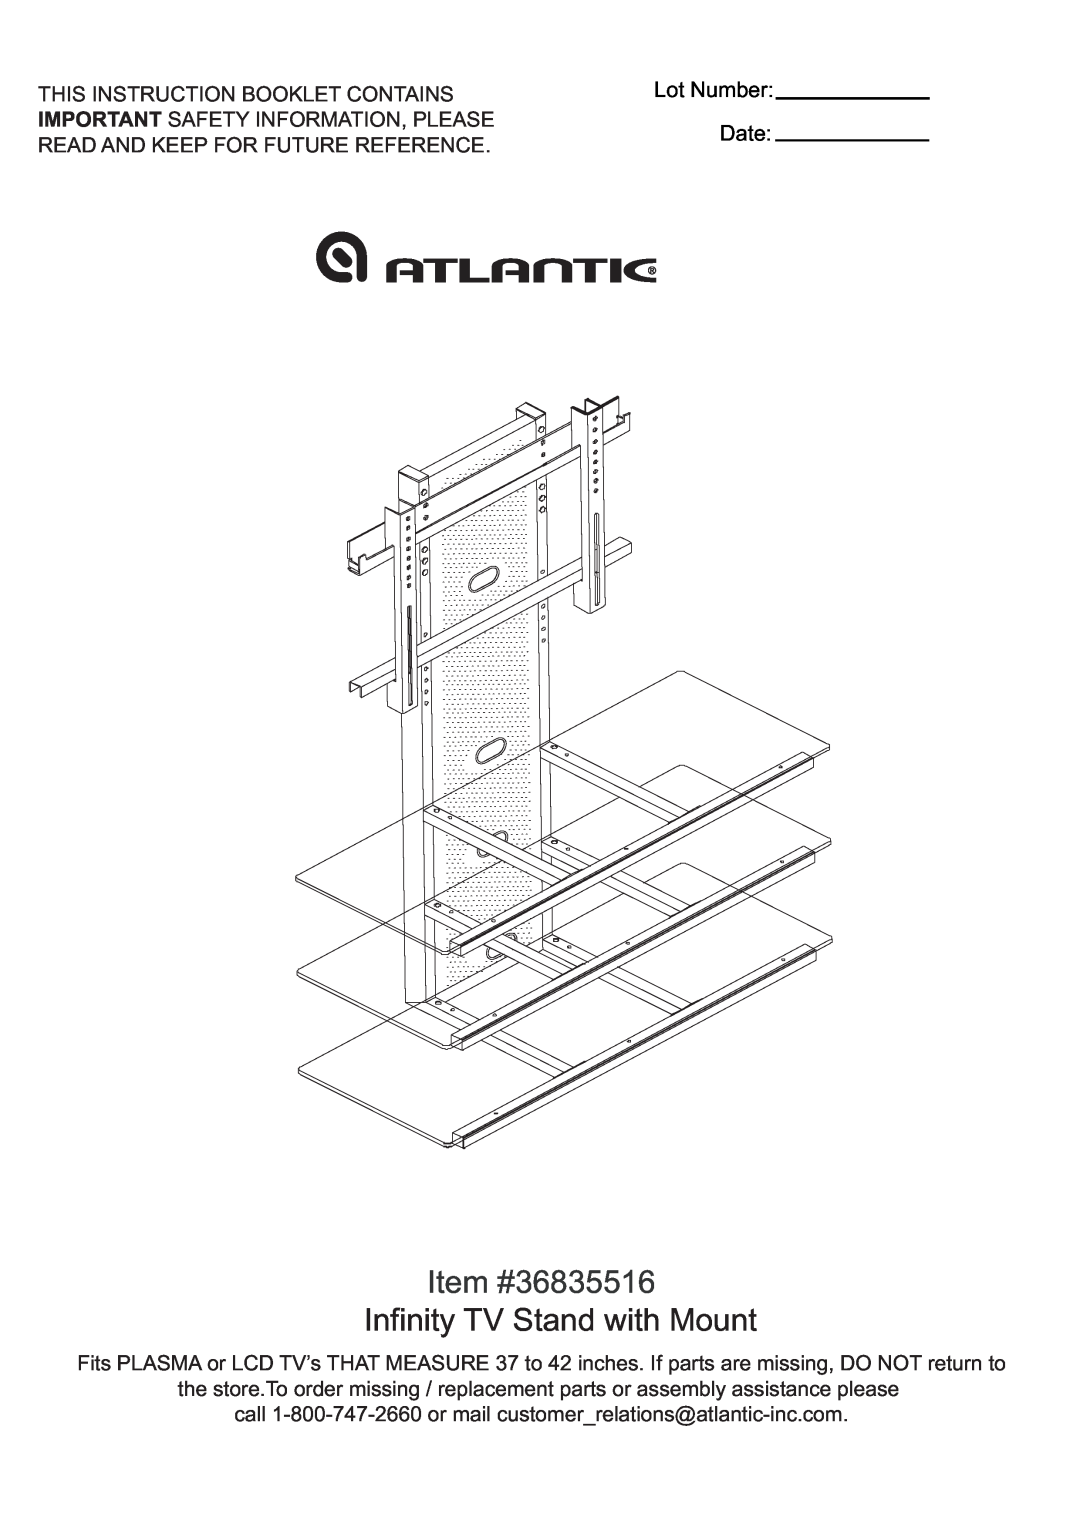 Atlantic manual Item #36835516, Infinity TV Stand with Mount, This Instruction Booklet Contains 